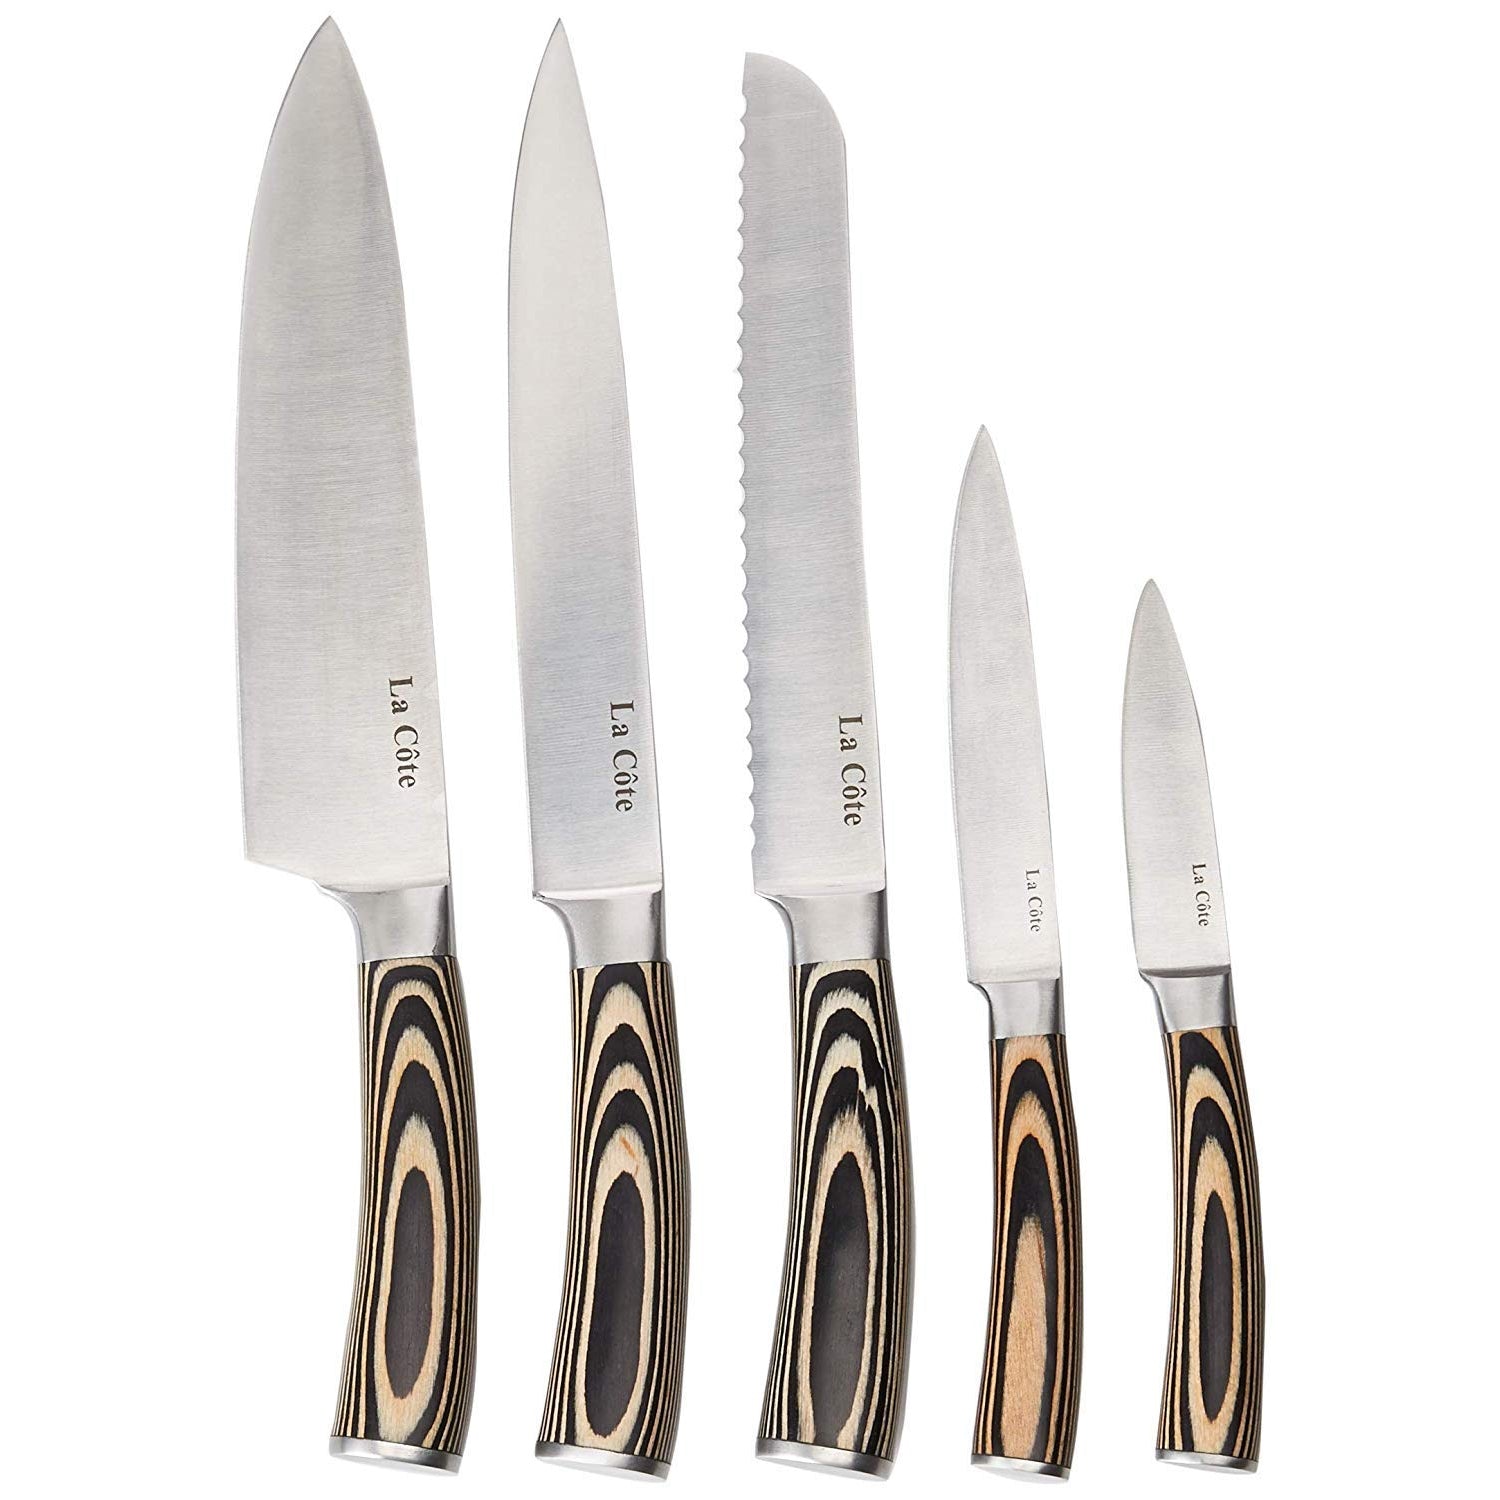 La Cote 5 Piece Chef Knives Set Japanese Stainless Steel Pakka Wood Handle In Gift Box (5 PC Chef Knife Set)